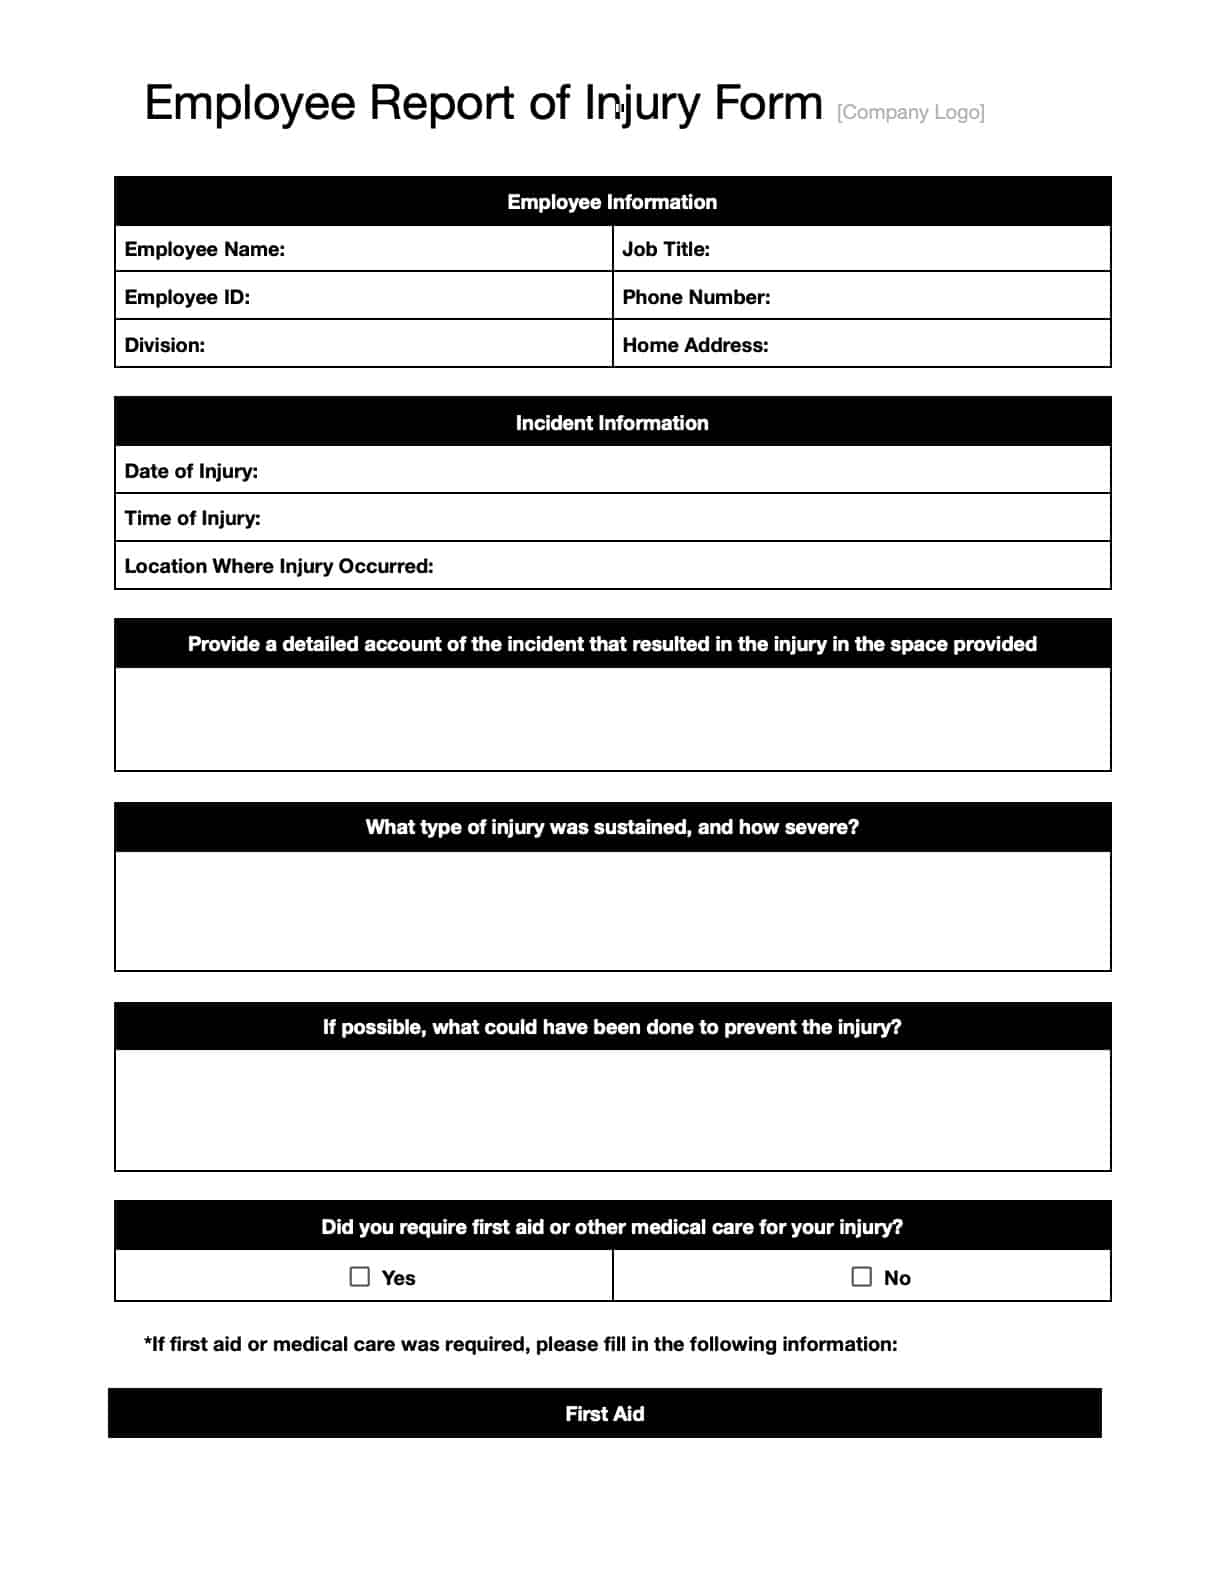 Employee Report of Injury Form